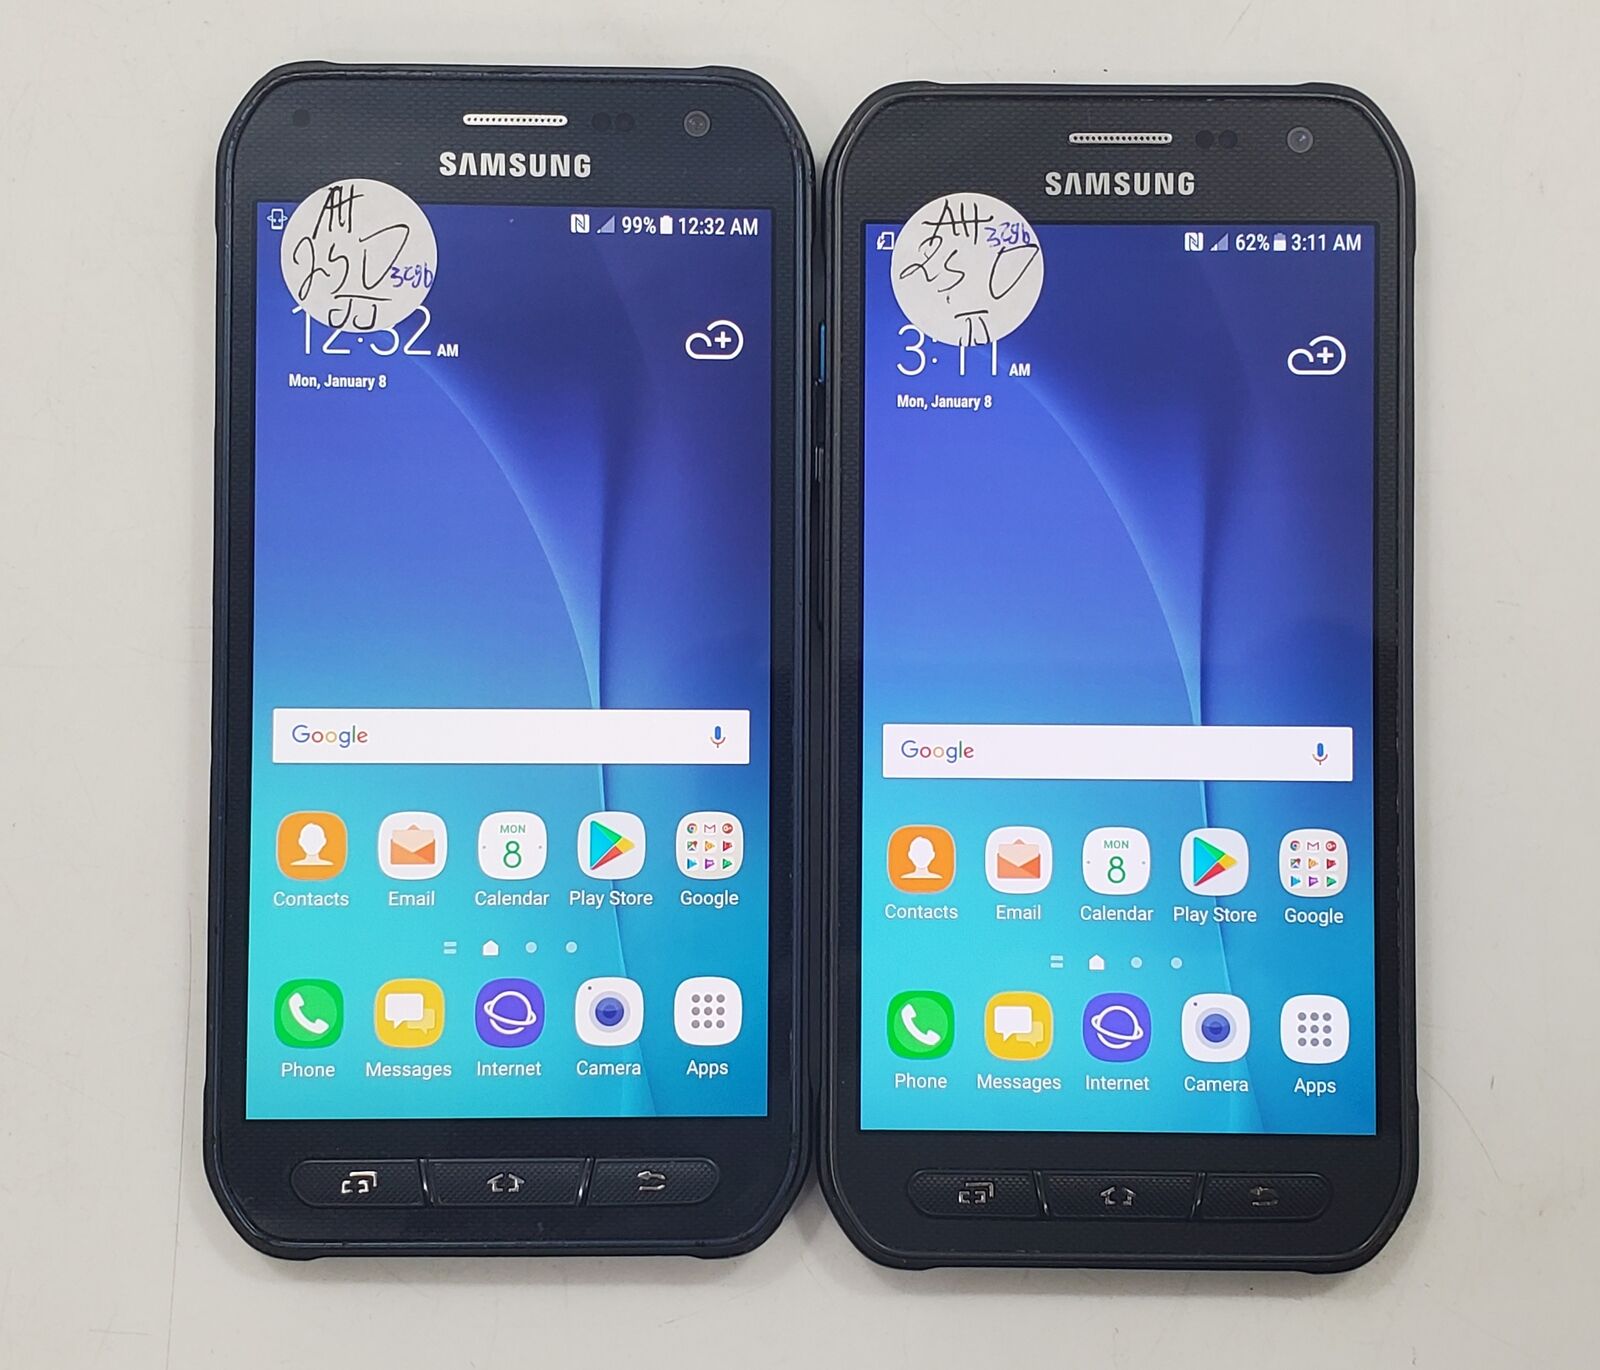 buy-a-samsung-phone-on-att-get-a-galaxy-s6-for-free